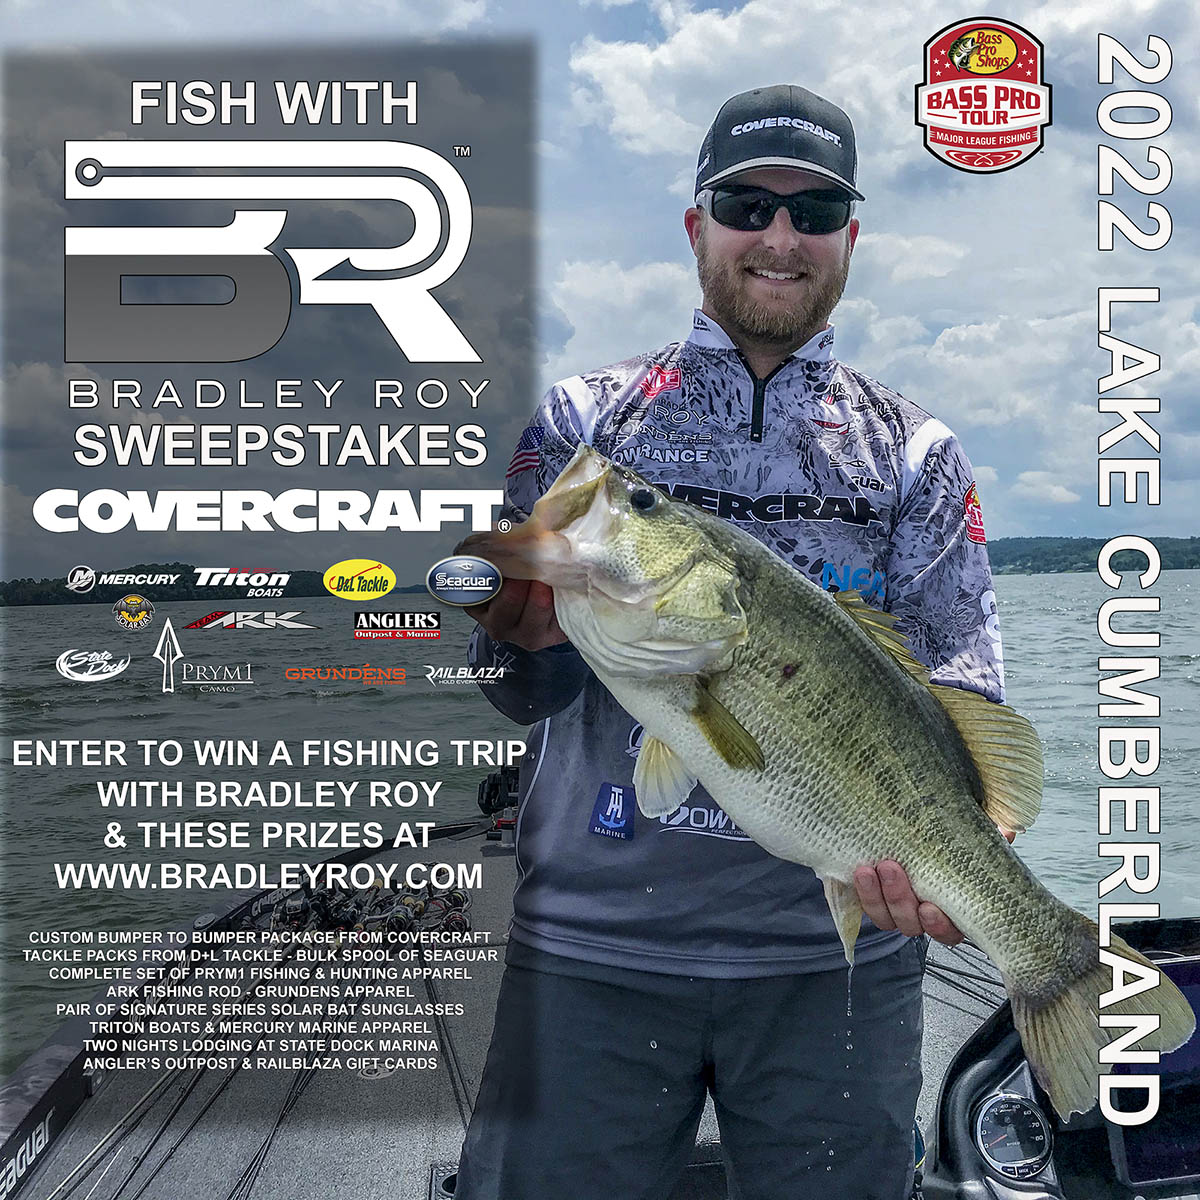 fish with bradley roy 2022 sweepstakes